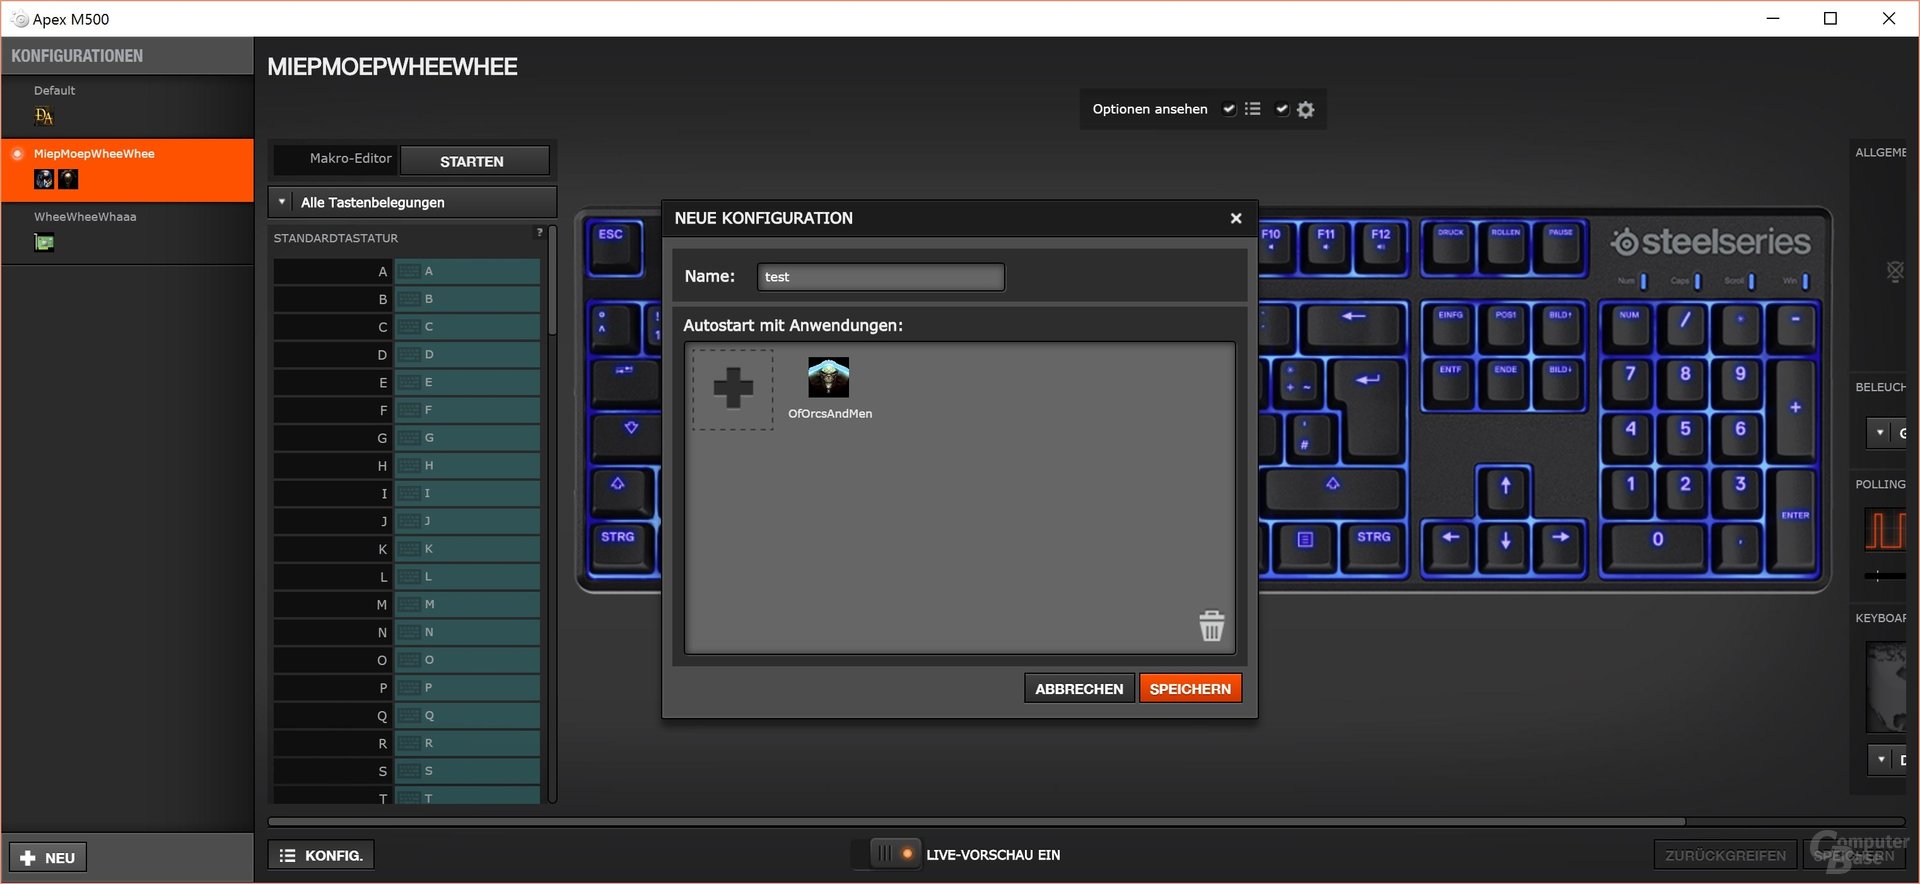 How to download steelseries software aircontrol software download